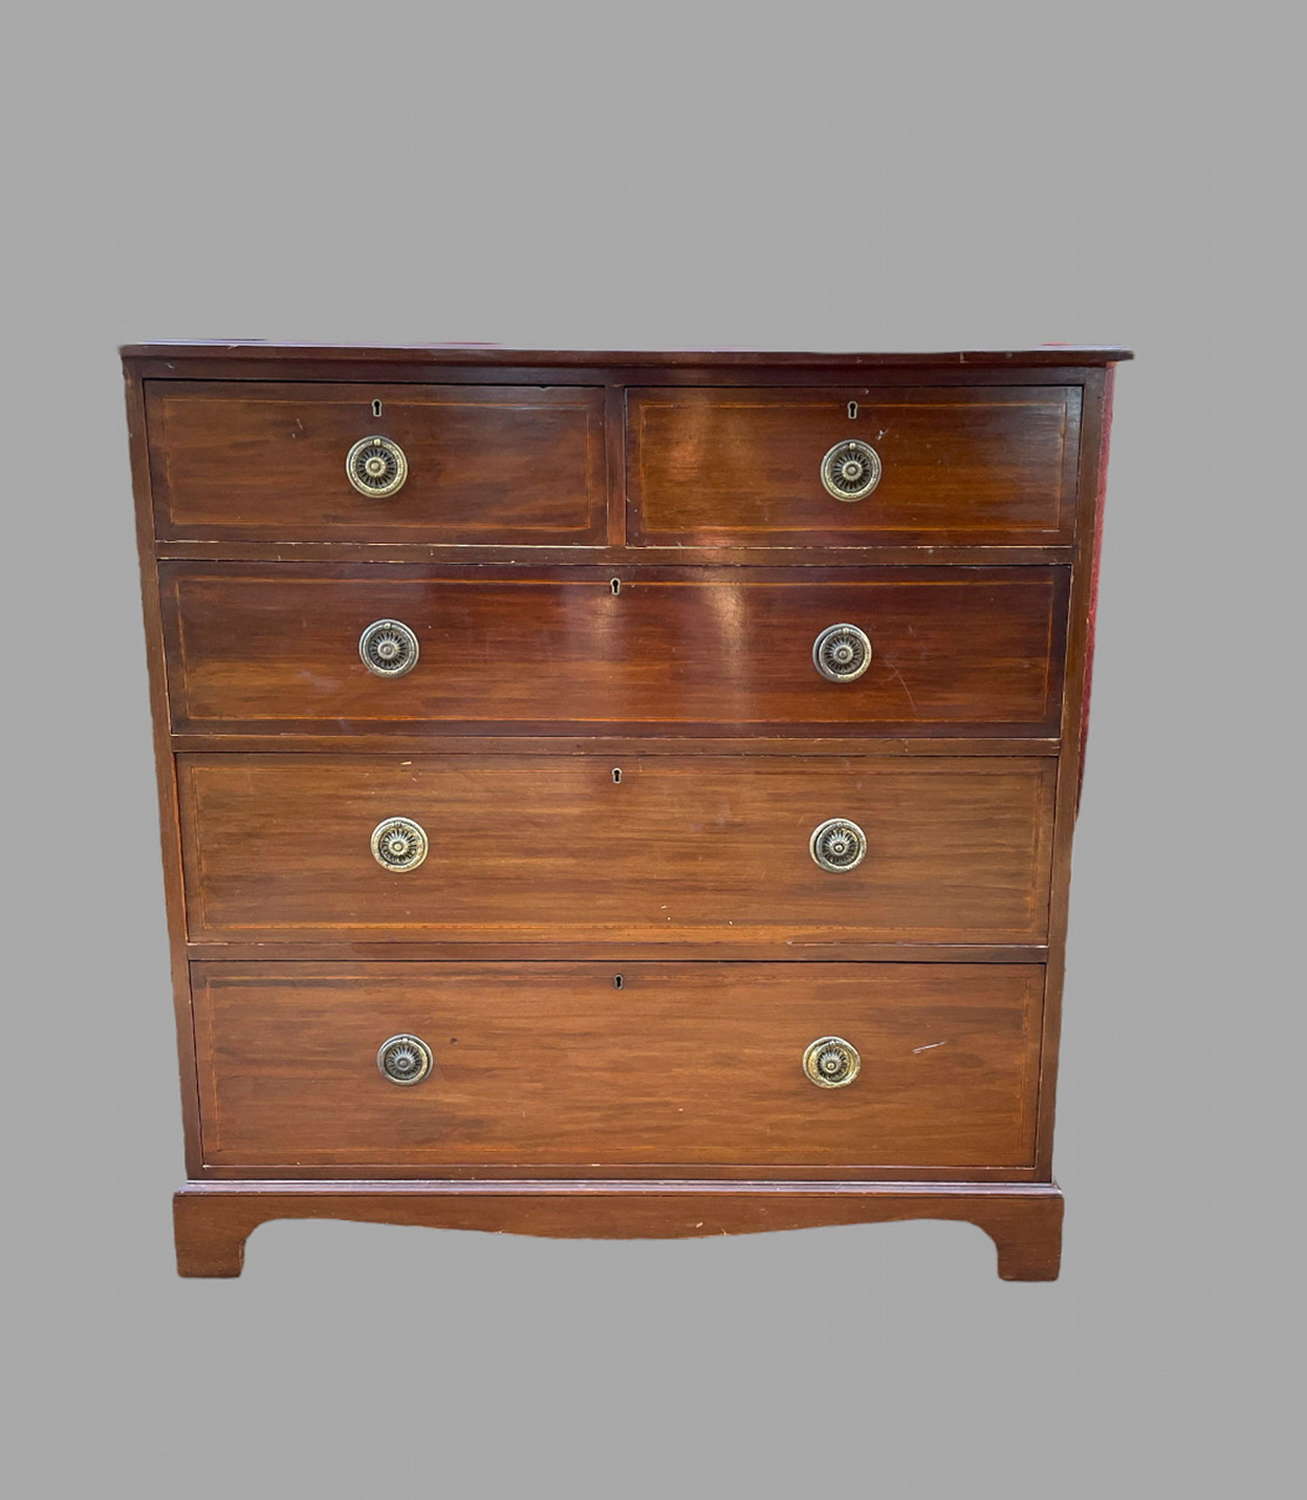 An Edwardian Chest of Drawers